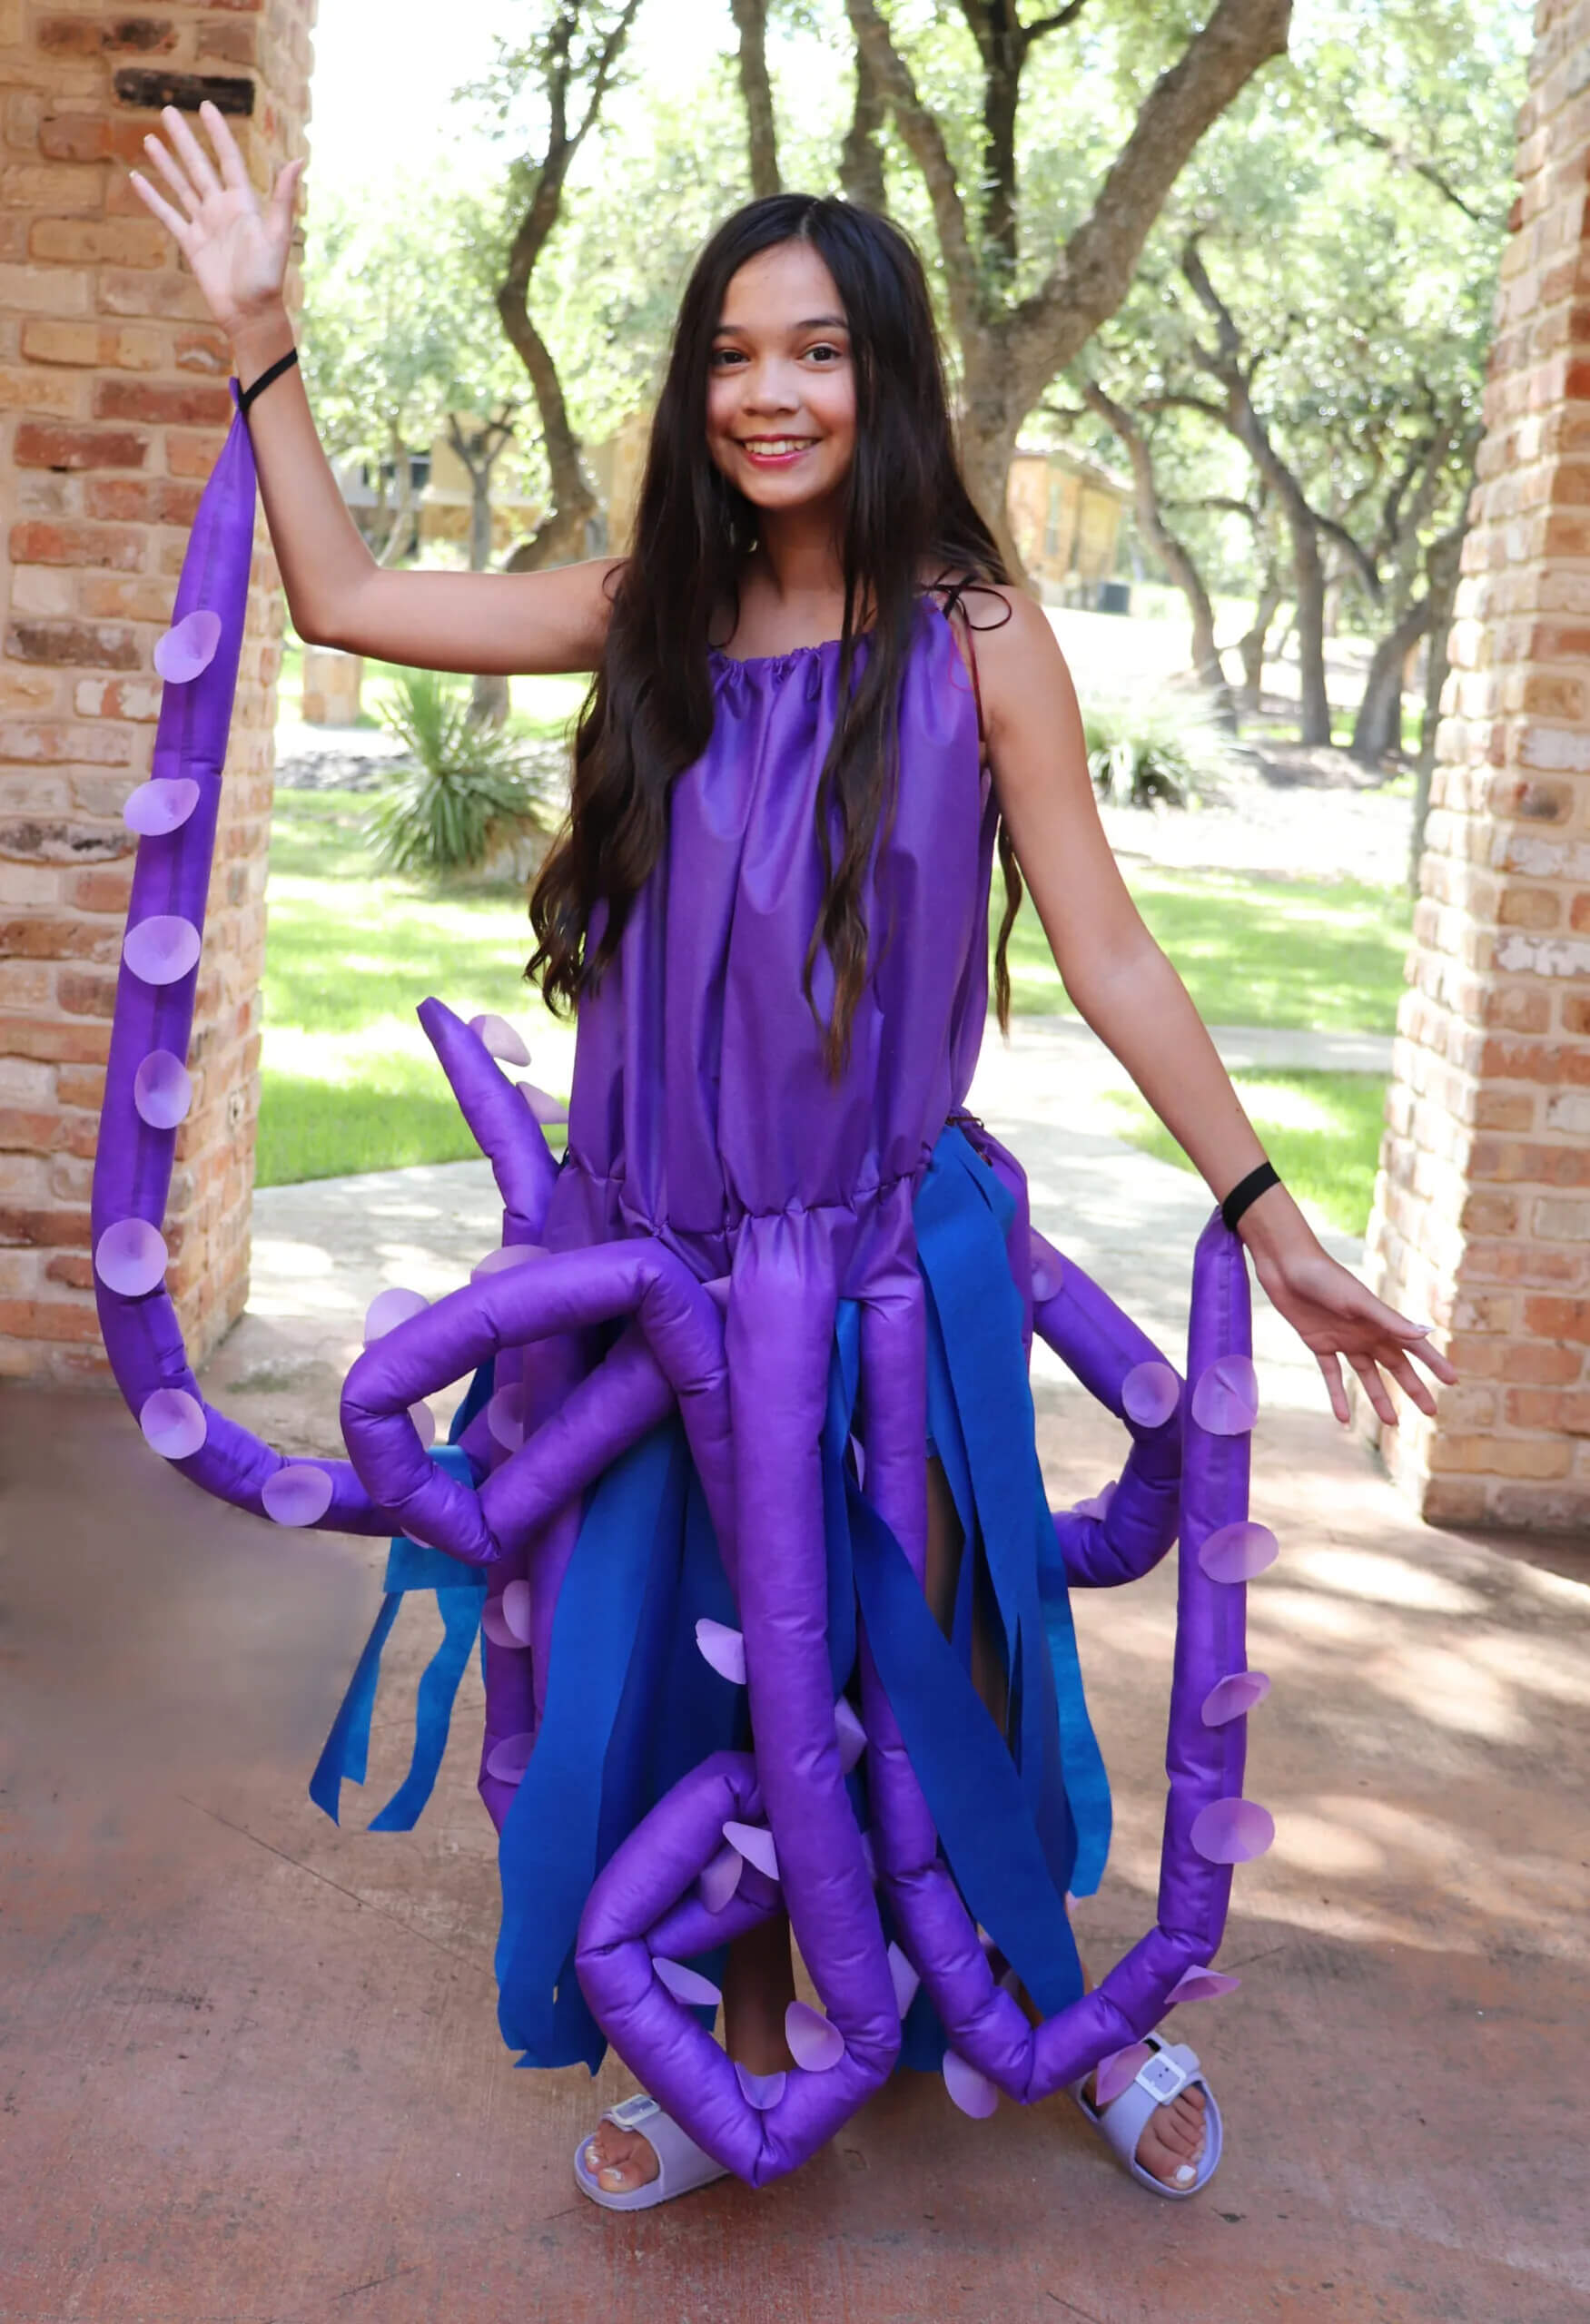 Eye Catching Octopus Themed Dress Tutorial For Kids